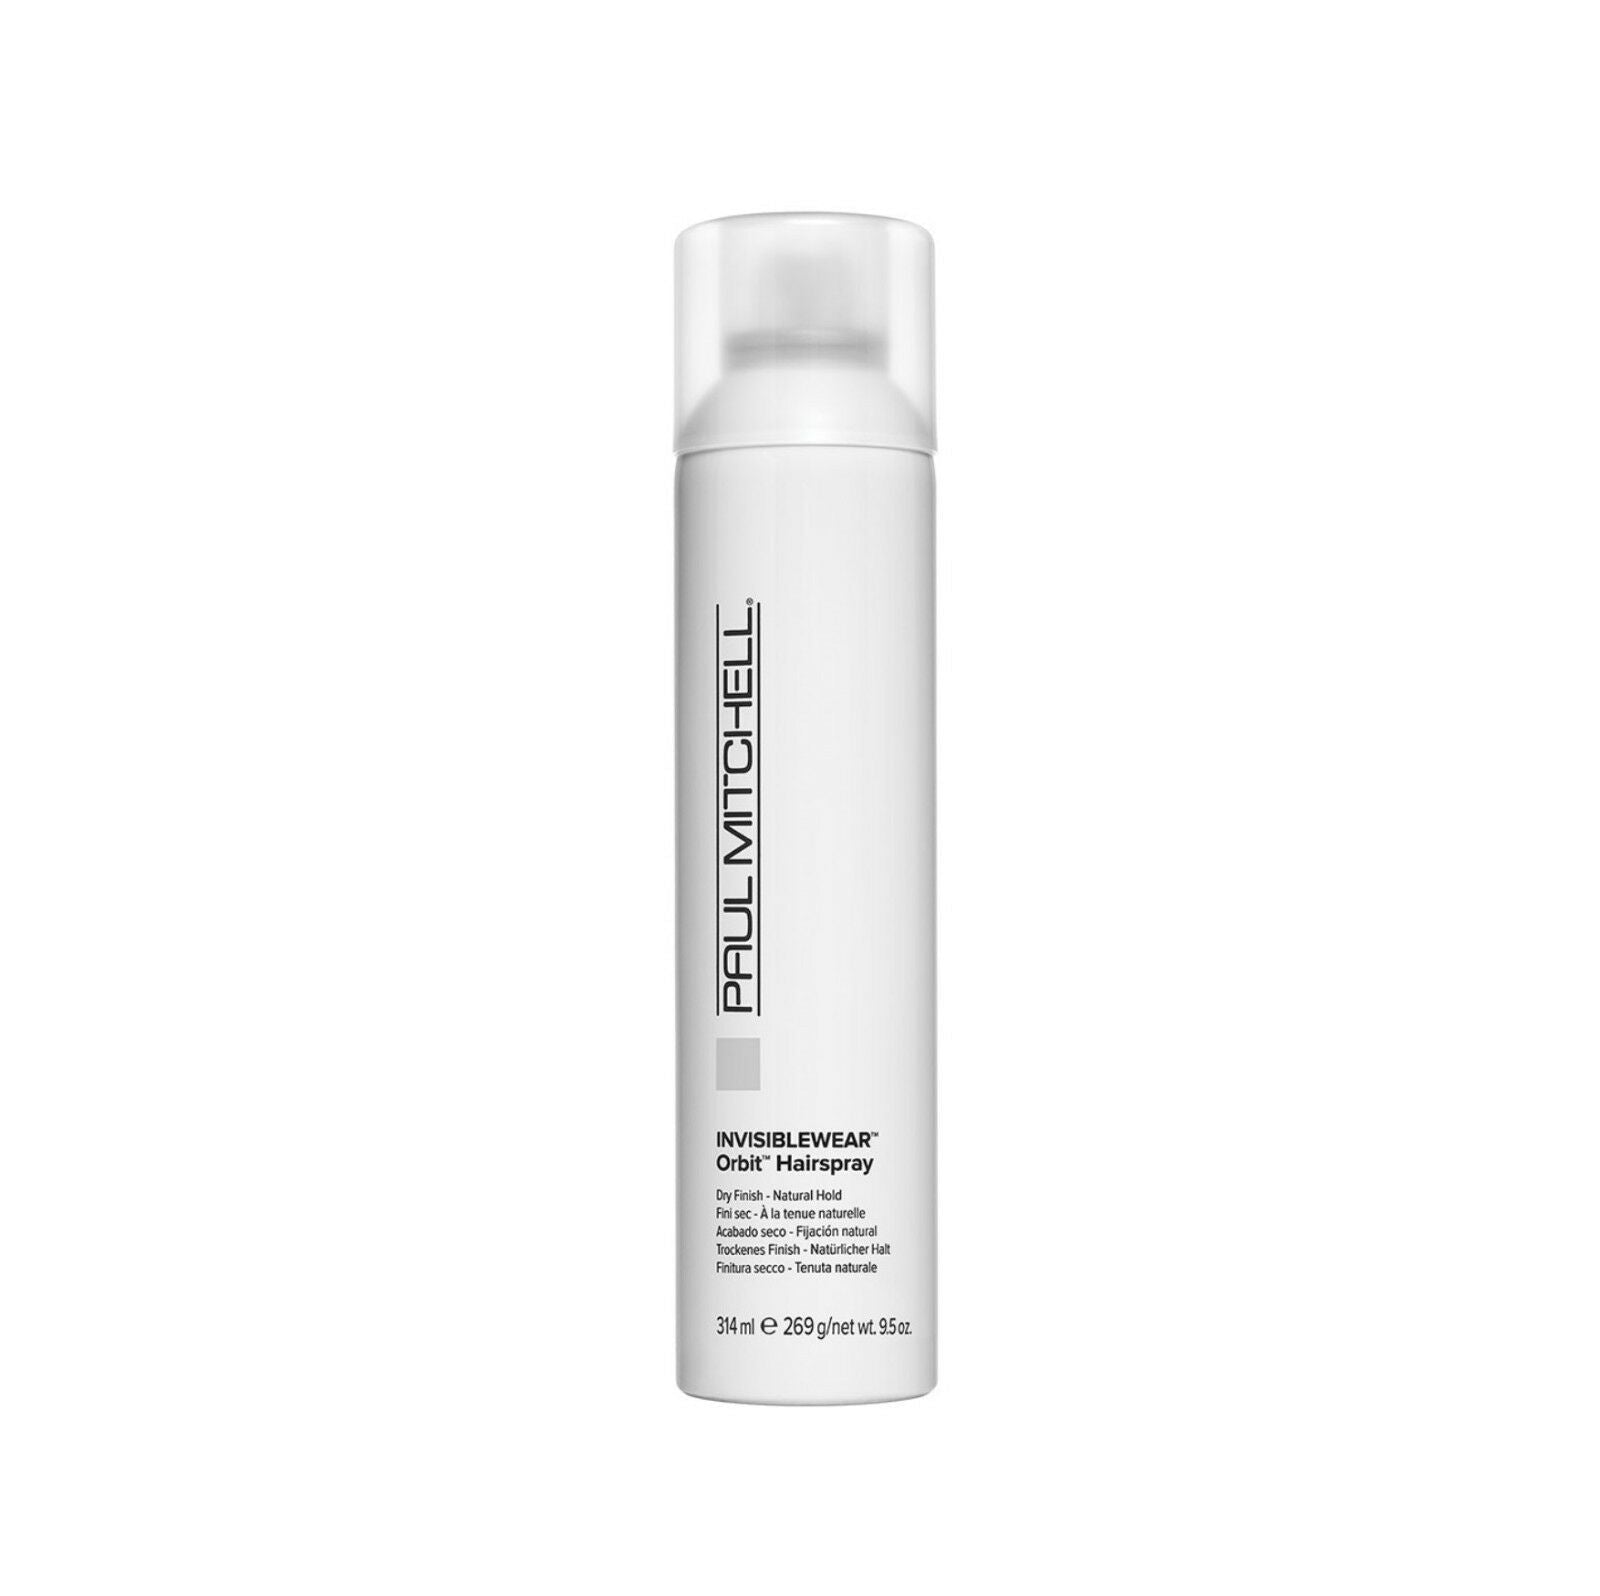 Paul Mitchell Invisiblewear Orbit Hairspray Finishing Natural Hold Duo 224ml x 2 - On Line Hair Depot